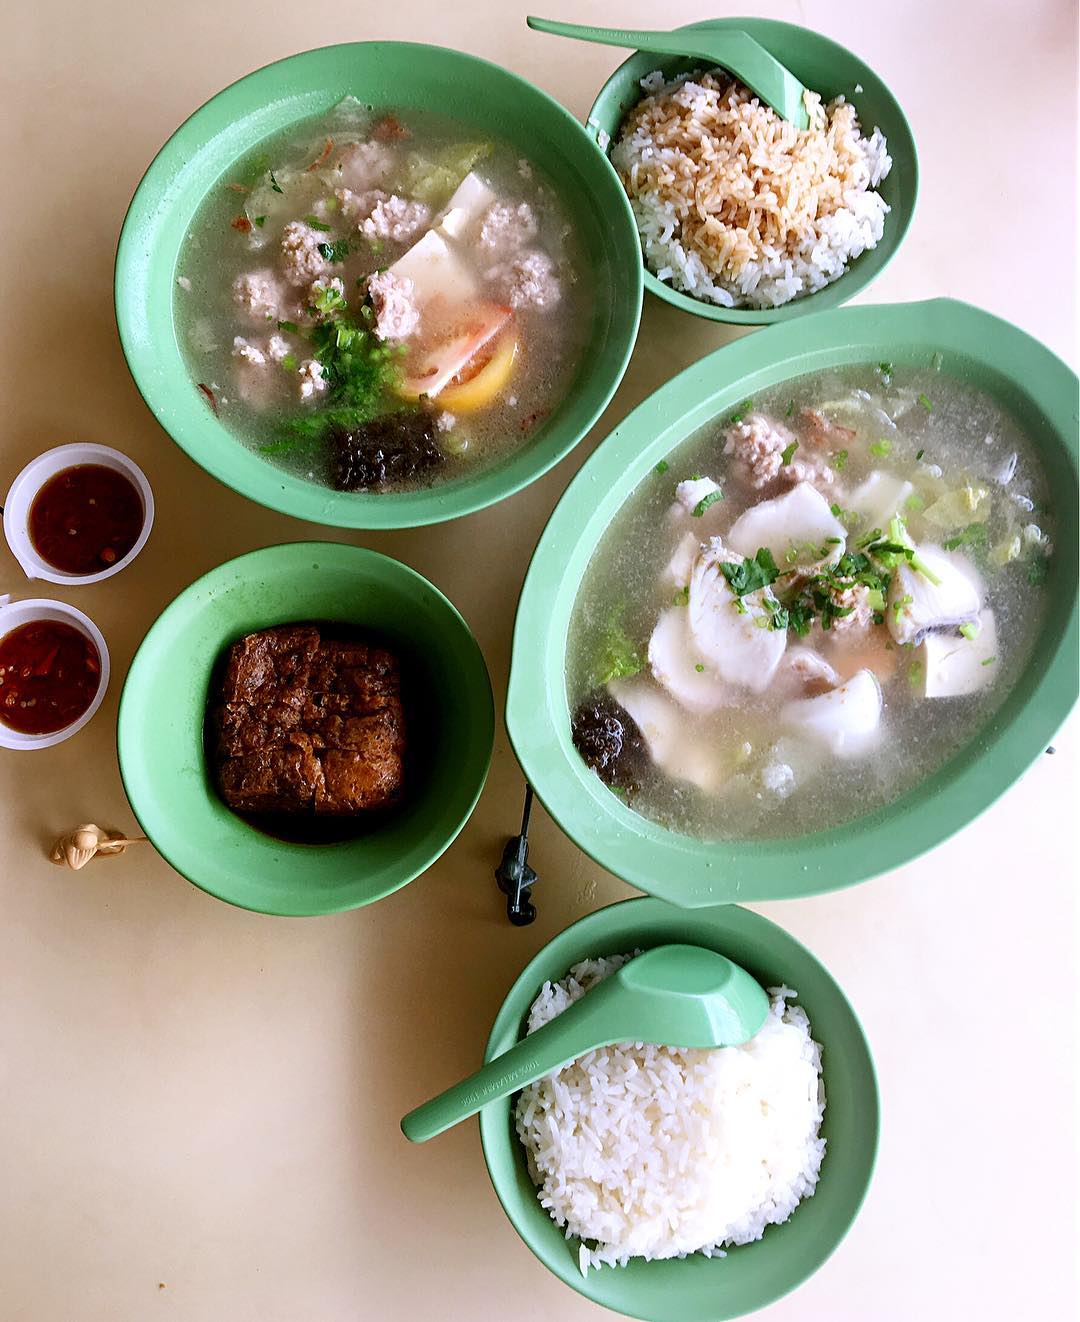 amoy street food centre- han kee fish soup